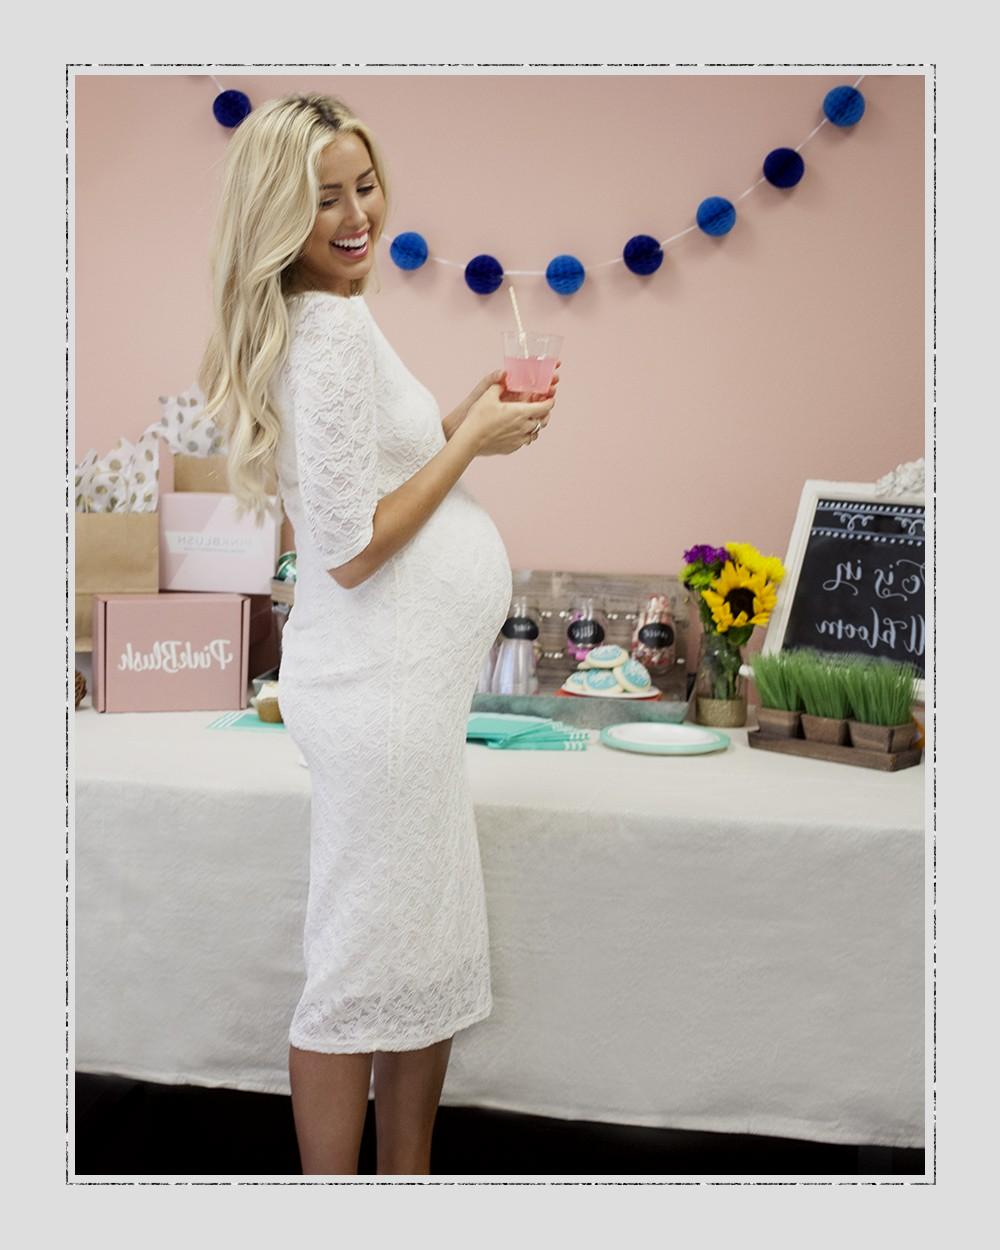 Full Size of Baby Shower:maternity Clothes H&m Showing Lsi Keywords For Baby Shower Dresses Maternity Evening Gowns Non Maternity Dresses For Baby Shower Cute Baby Shower Outfits For Mom Maternity Maxi Dresses Maternity Dresses Maternity Gown Style